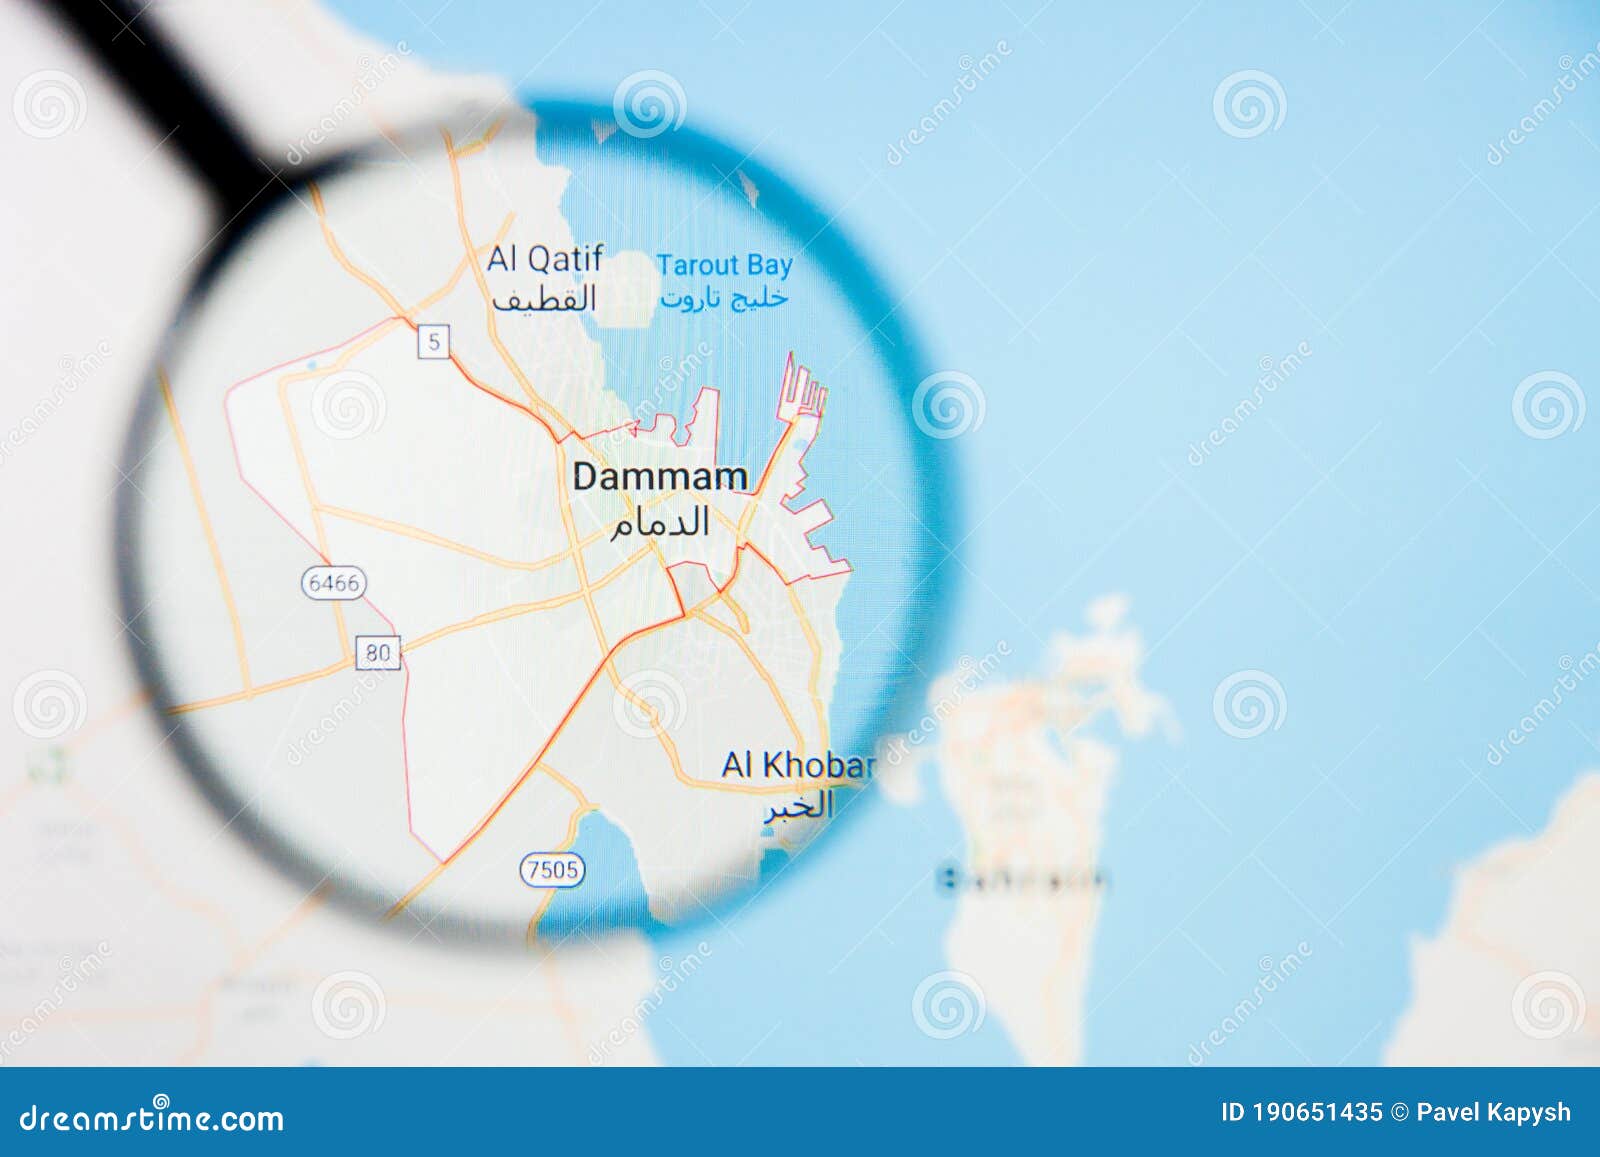 dammam city visualization illustrative concept on display screen through magnifying glass